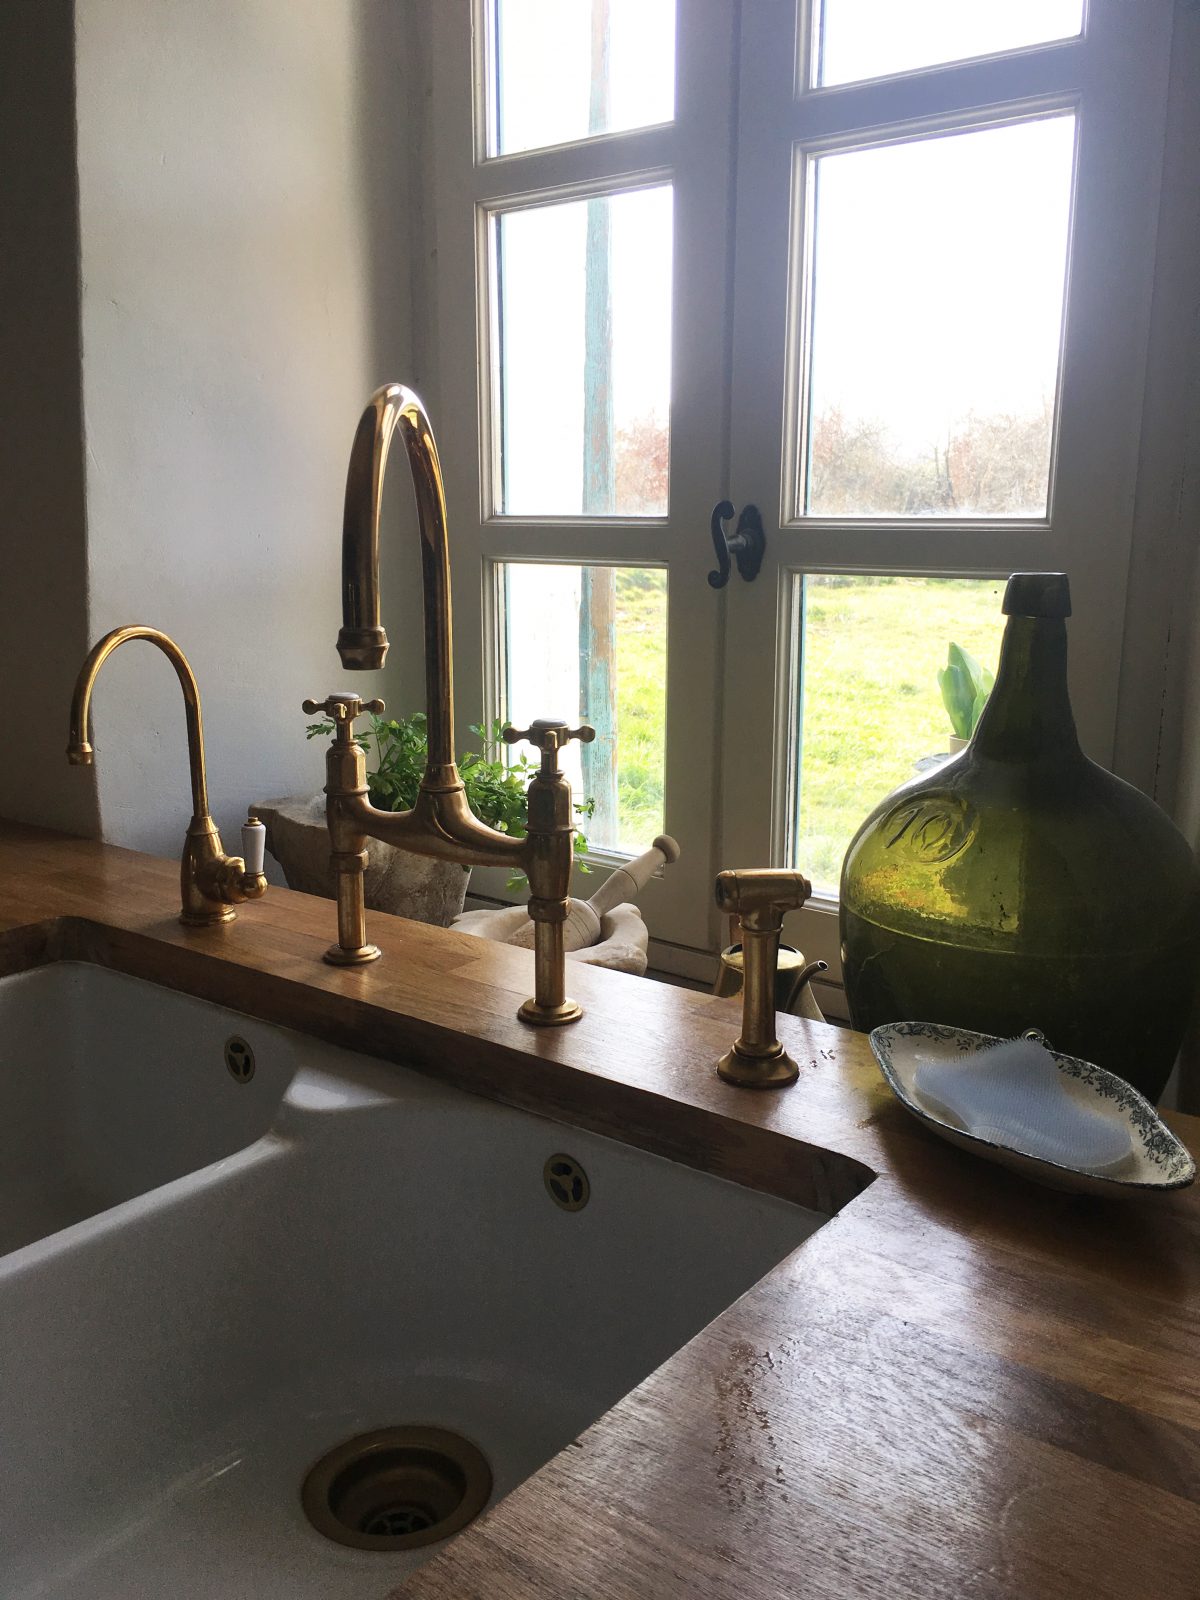 A deVOL Ionian and mini hot tap, both in our exclusive Aged Brass finish - made in collaboration with Perrin & Rowe.